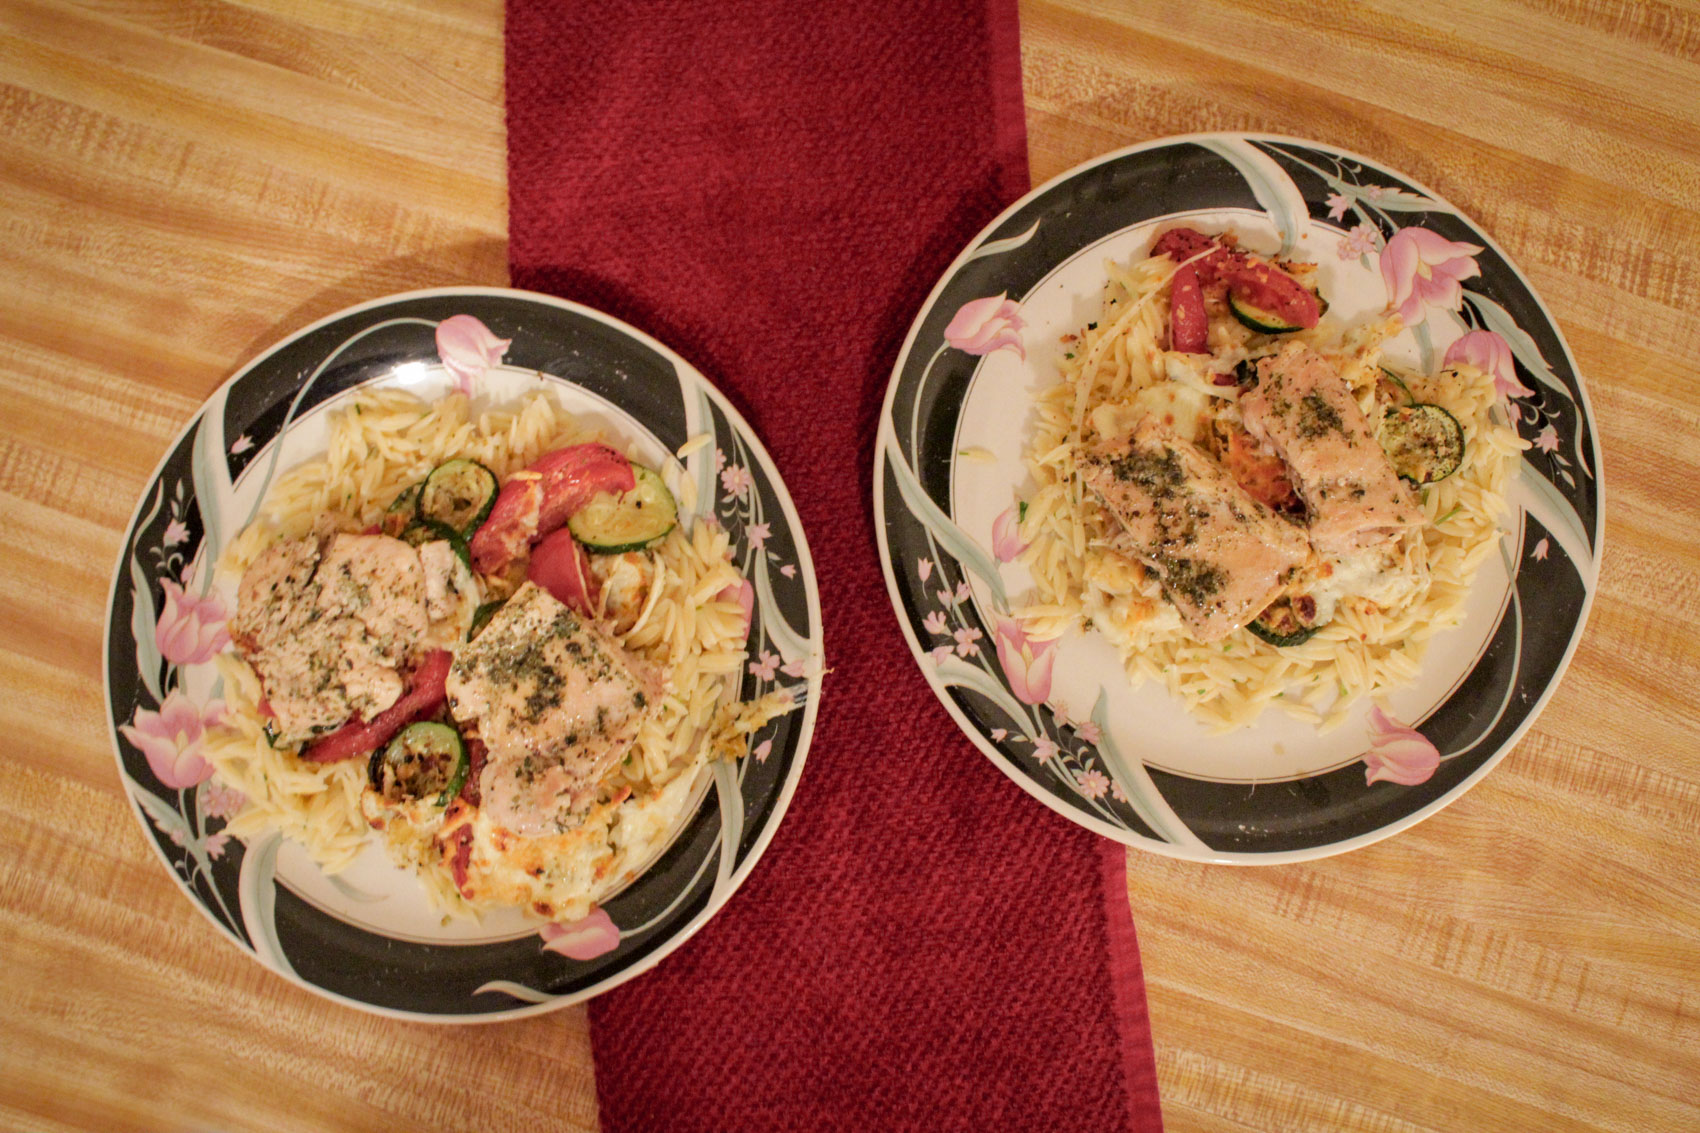 One of the HelloFresh meals we made